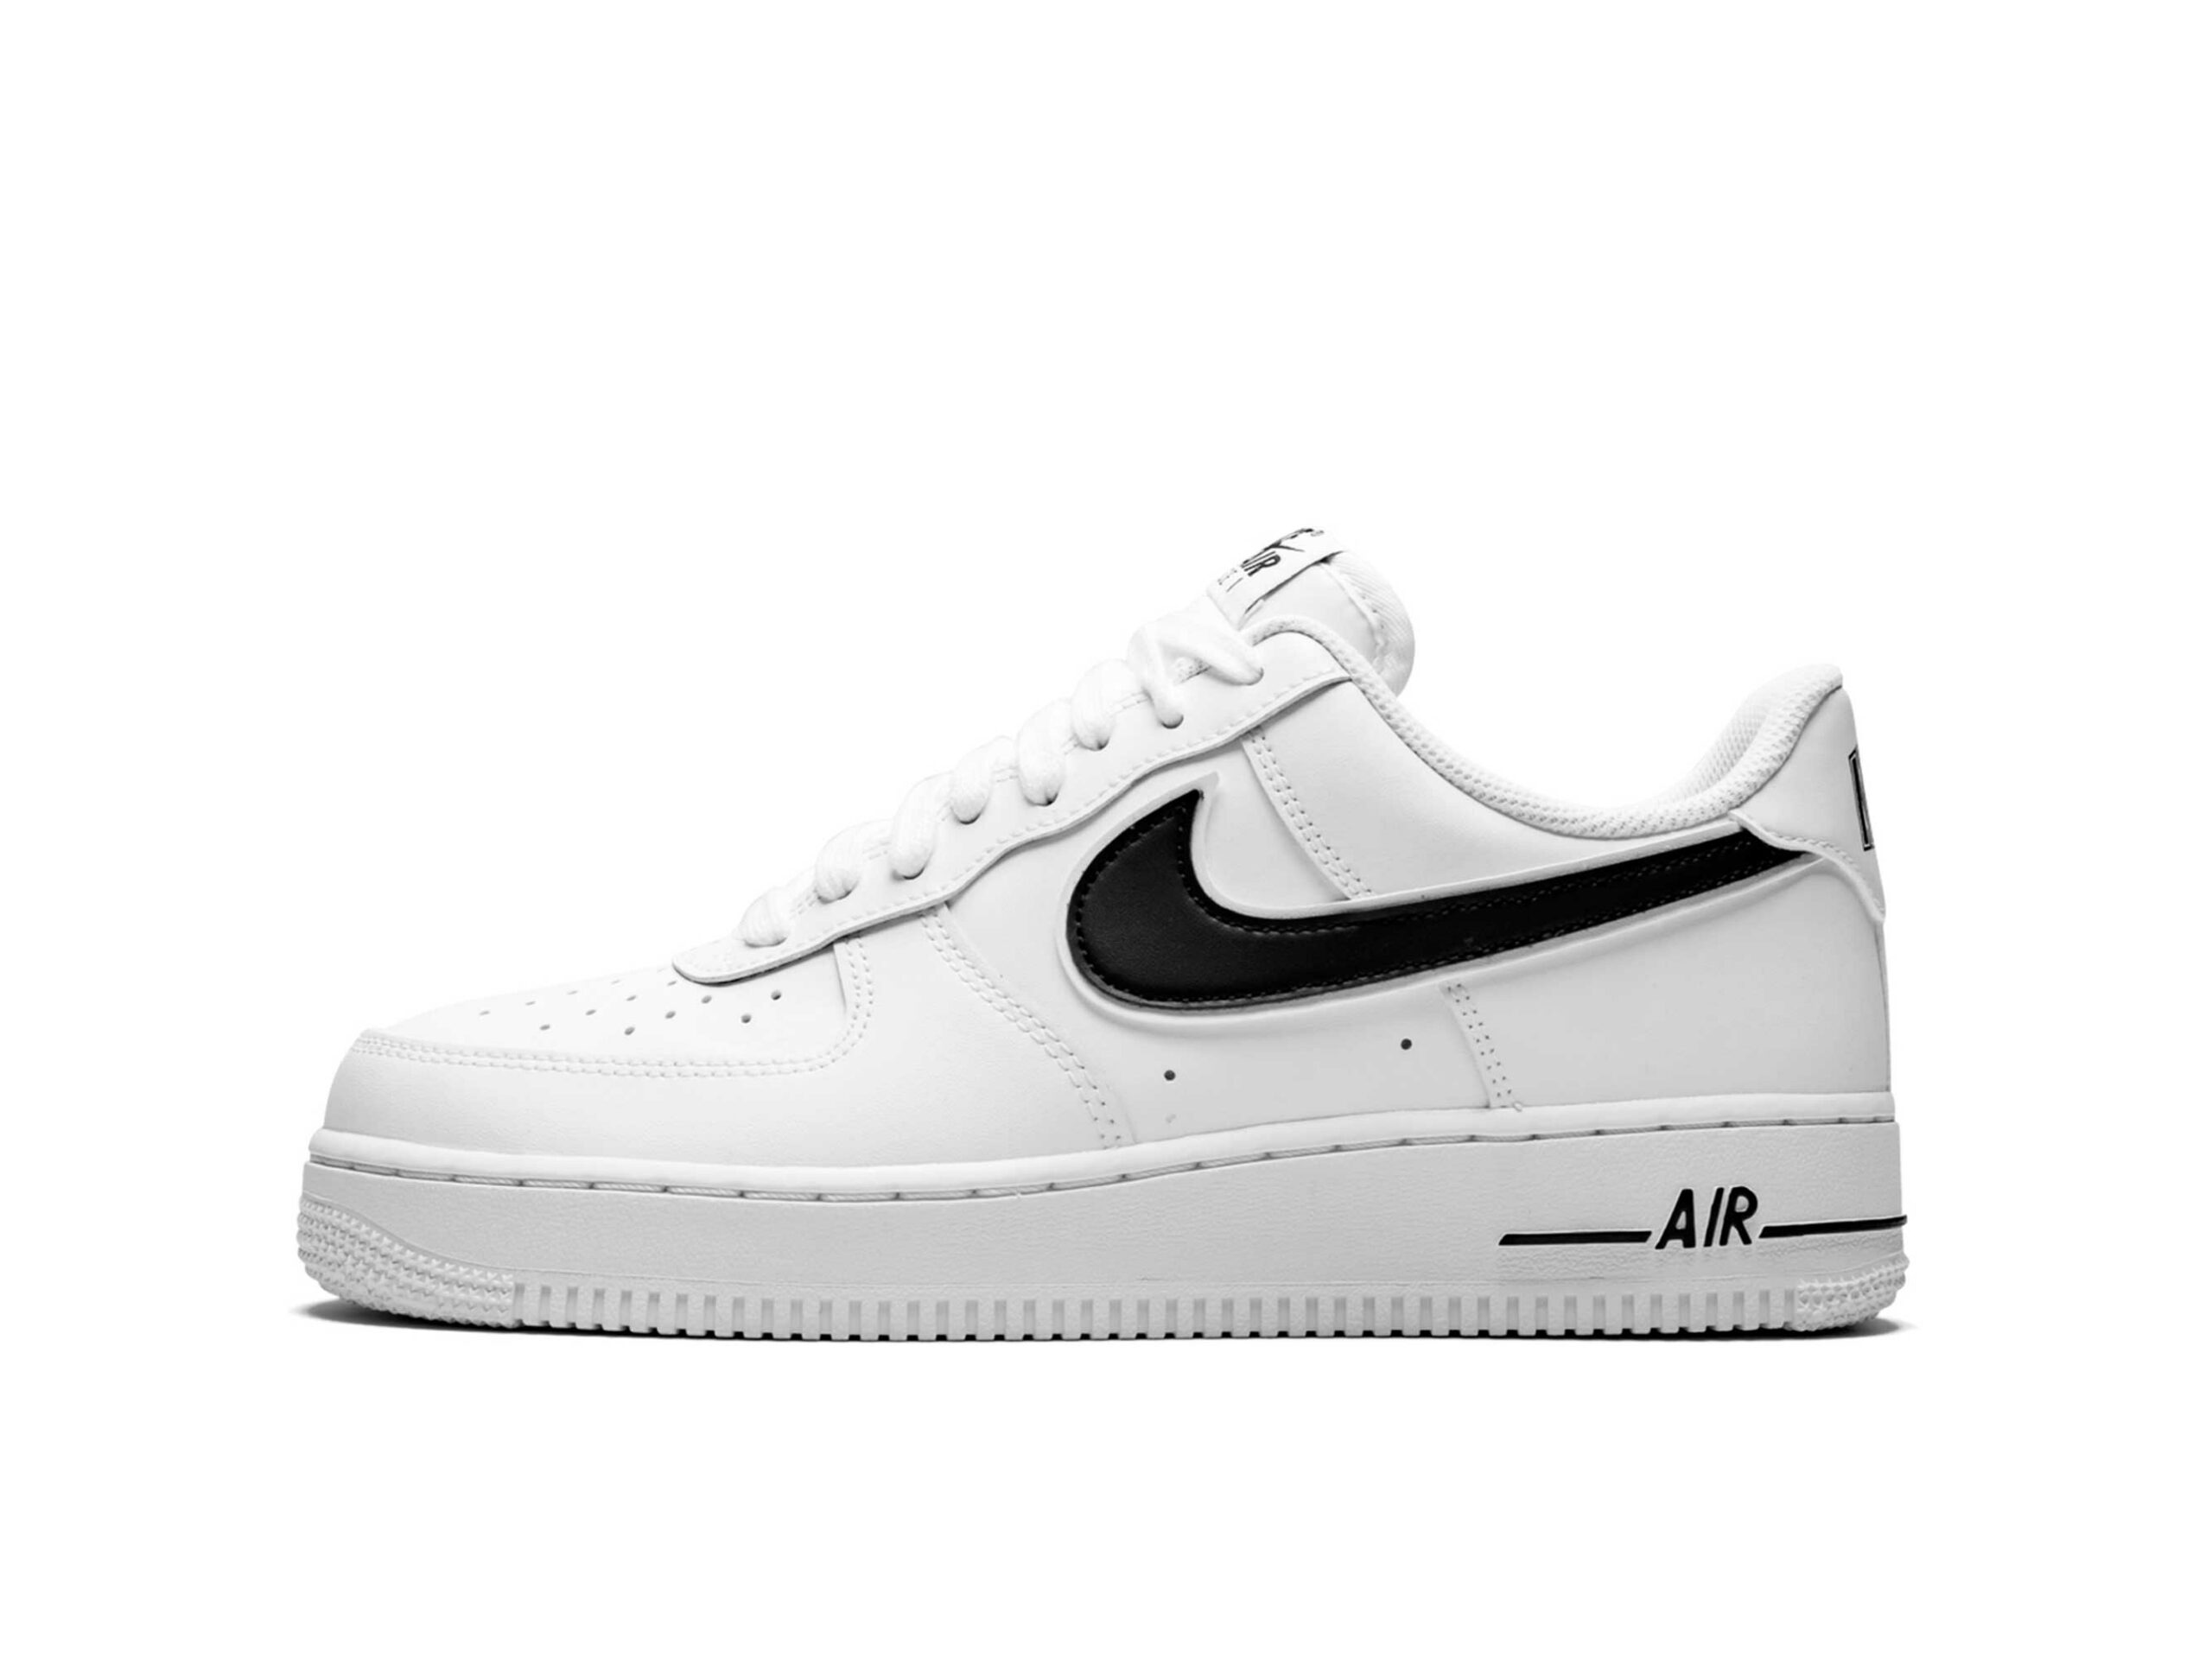 nike air force 1 low black and white AO2423_101 купить